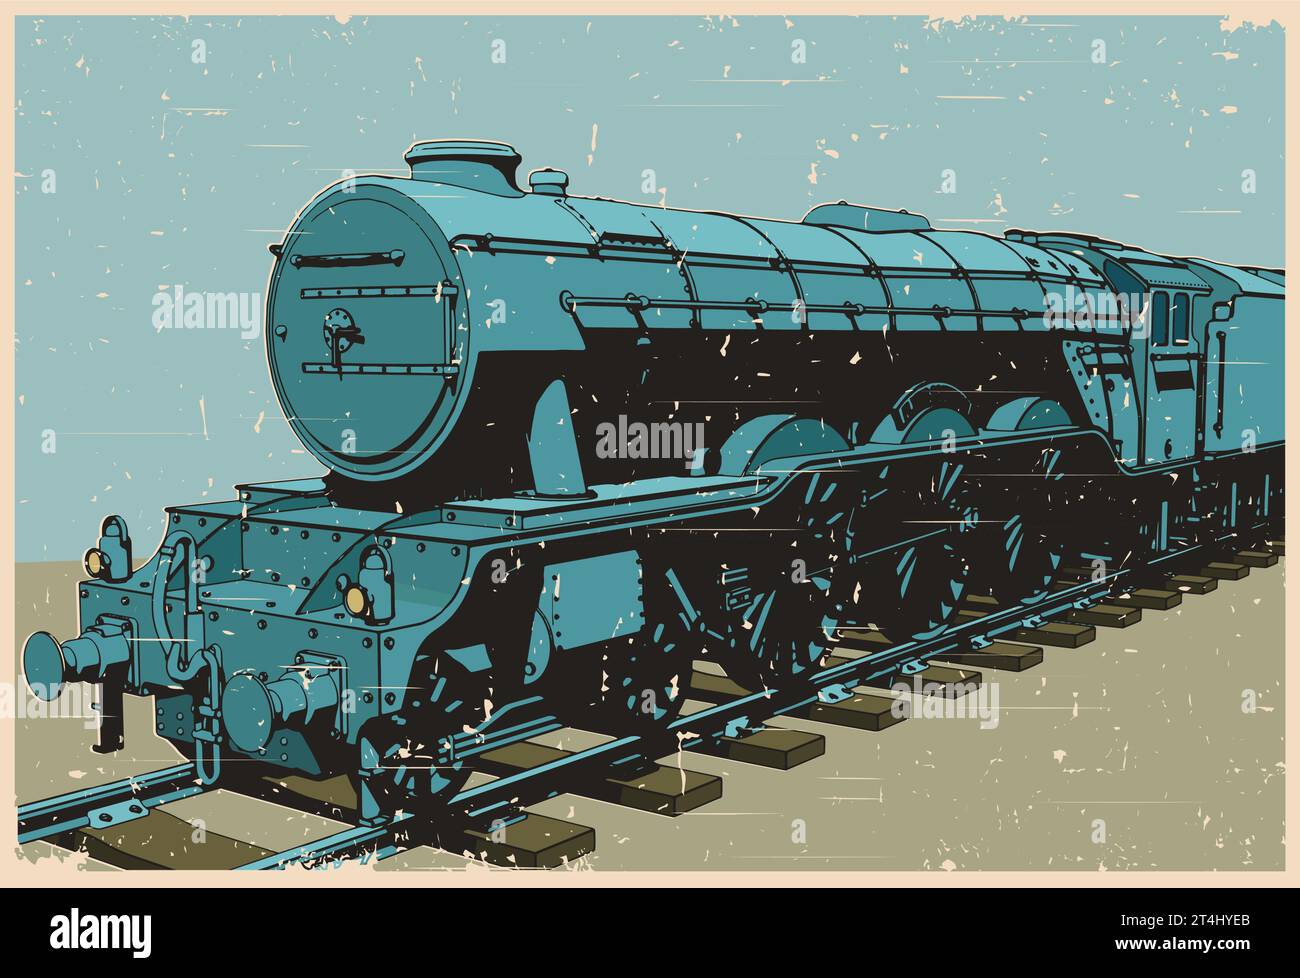 Stylized vector illustration of a steam locomotive in retro poster style Stock Vector